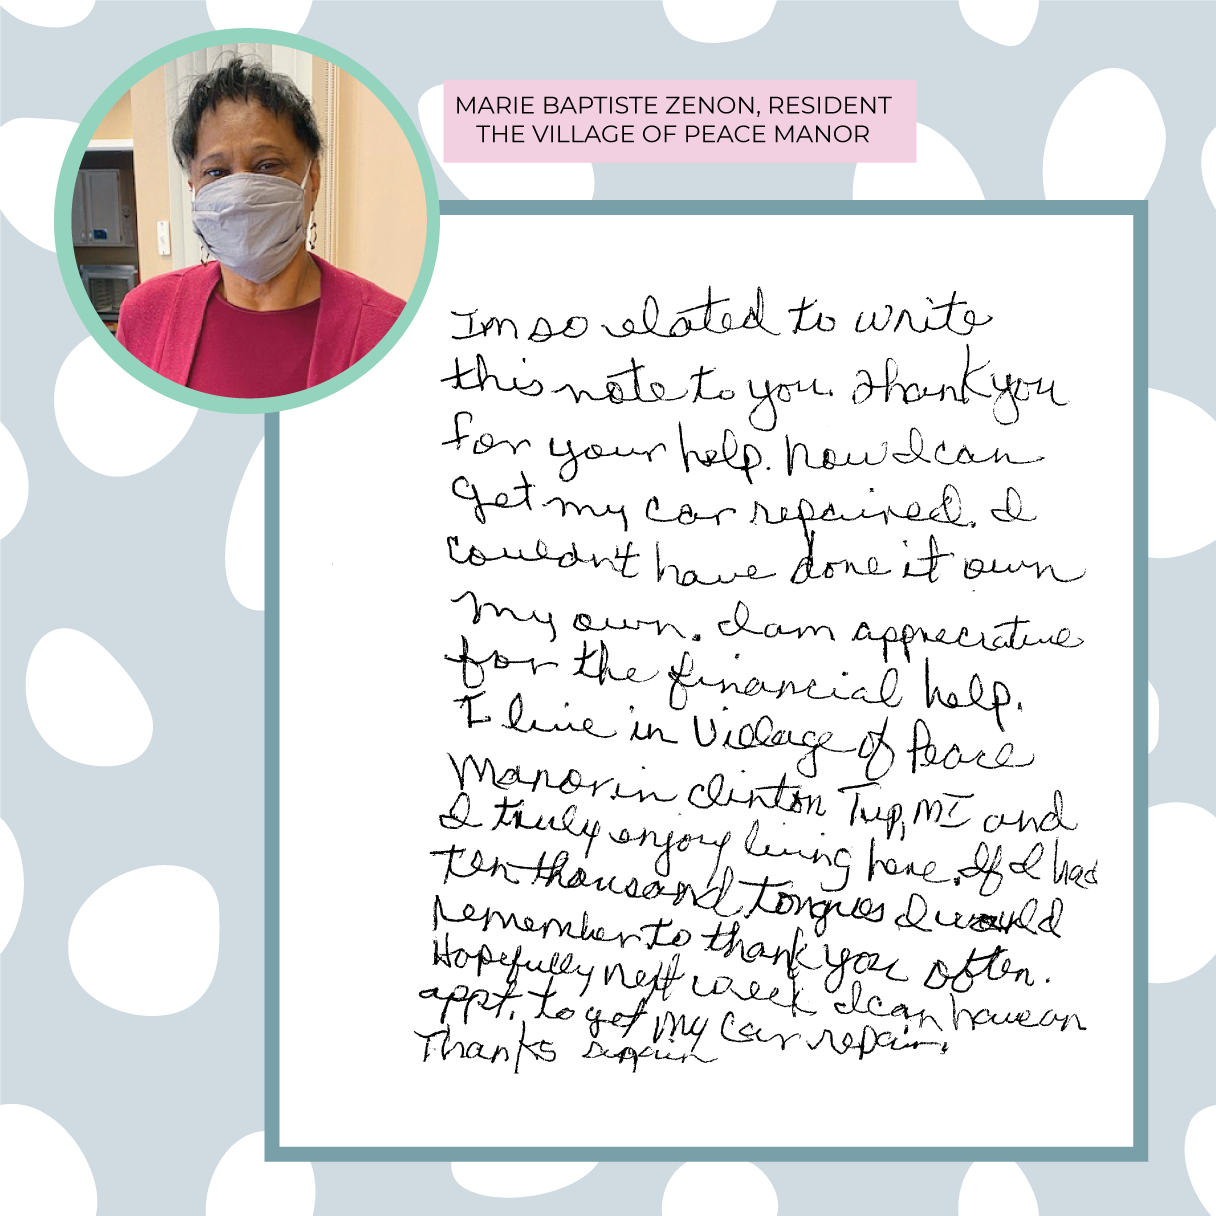 A thank you note from resident Marie Baptiste Zenon, thanking donors for financial help on getting her car fixed.